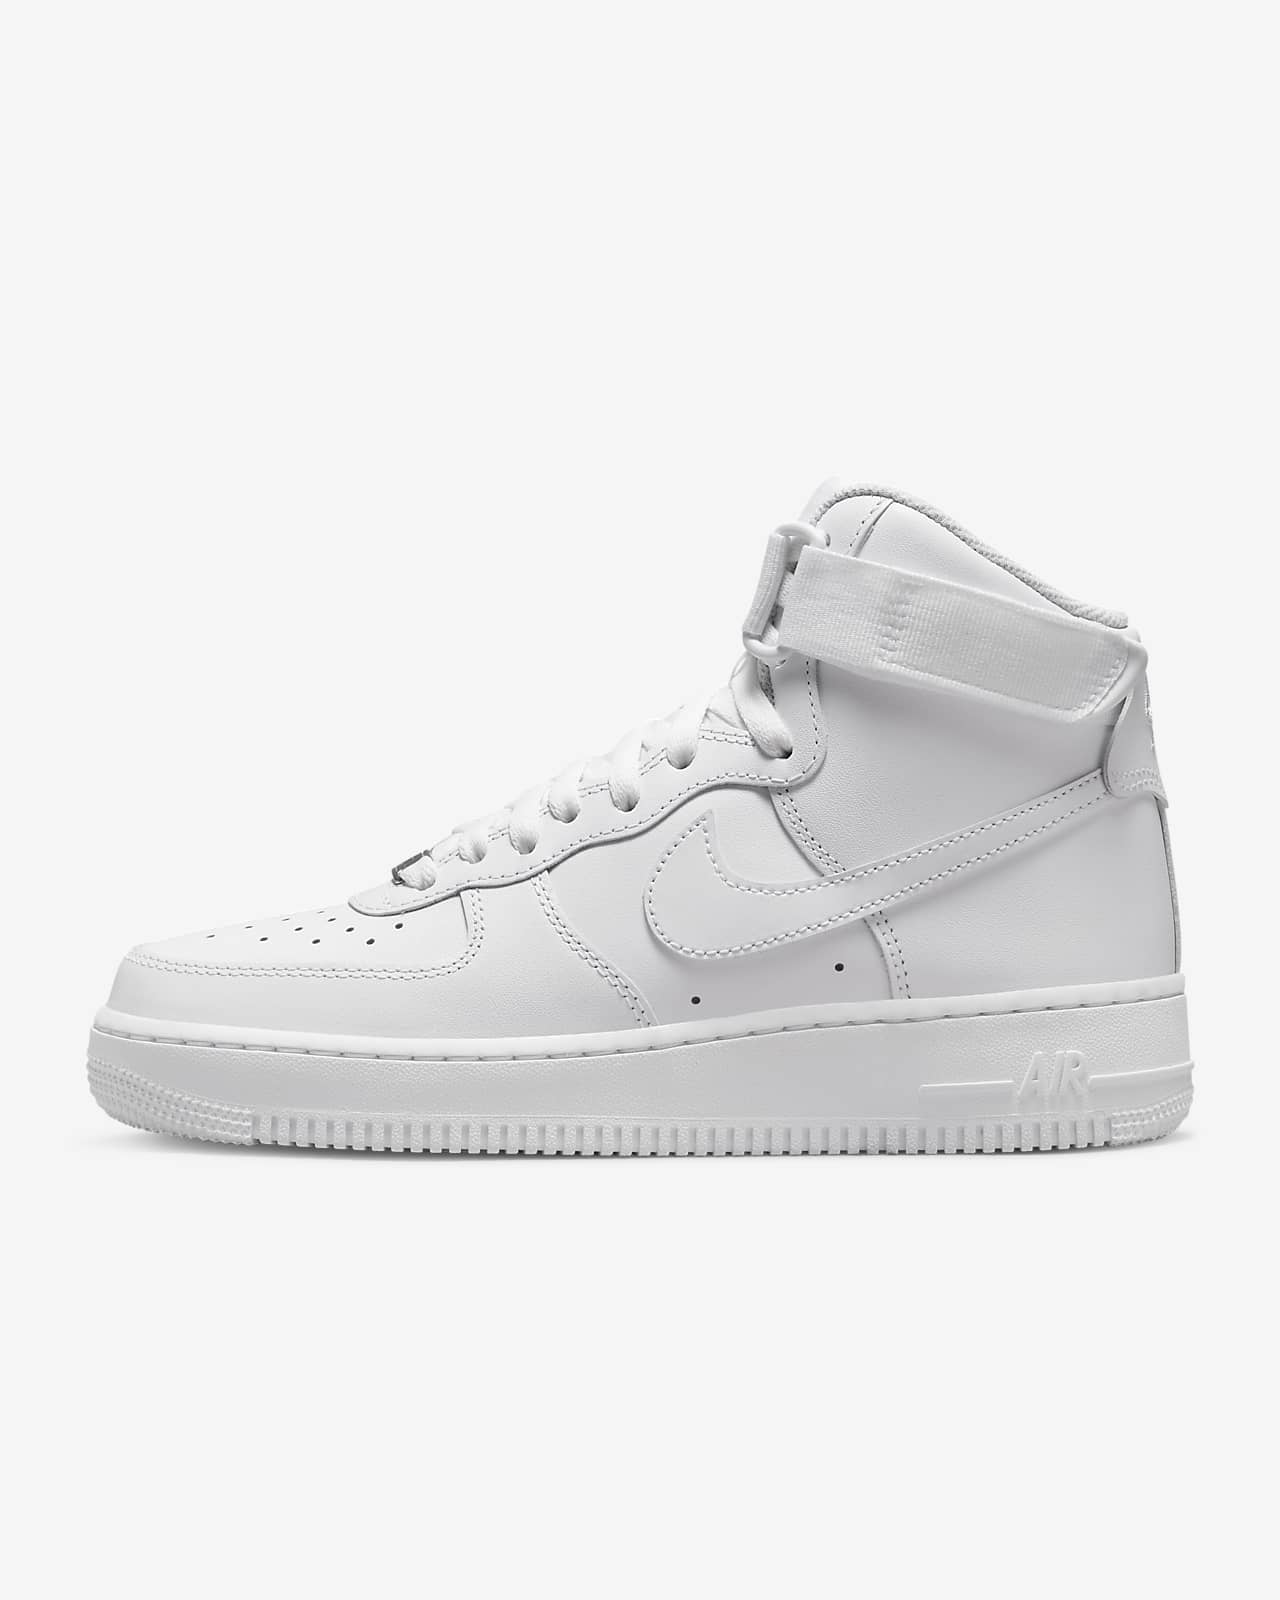 Nike Air Force 1 High Womens Shoes Review